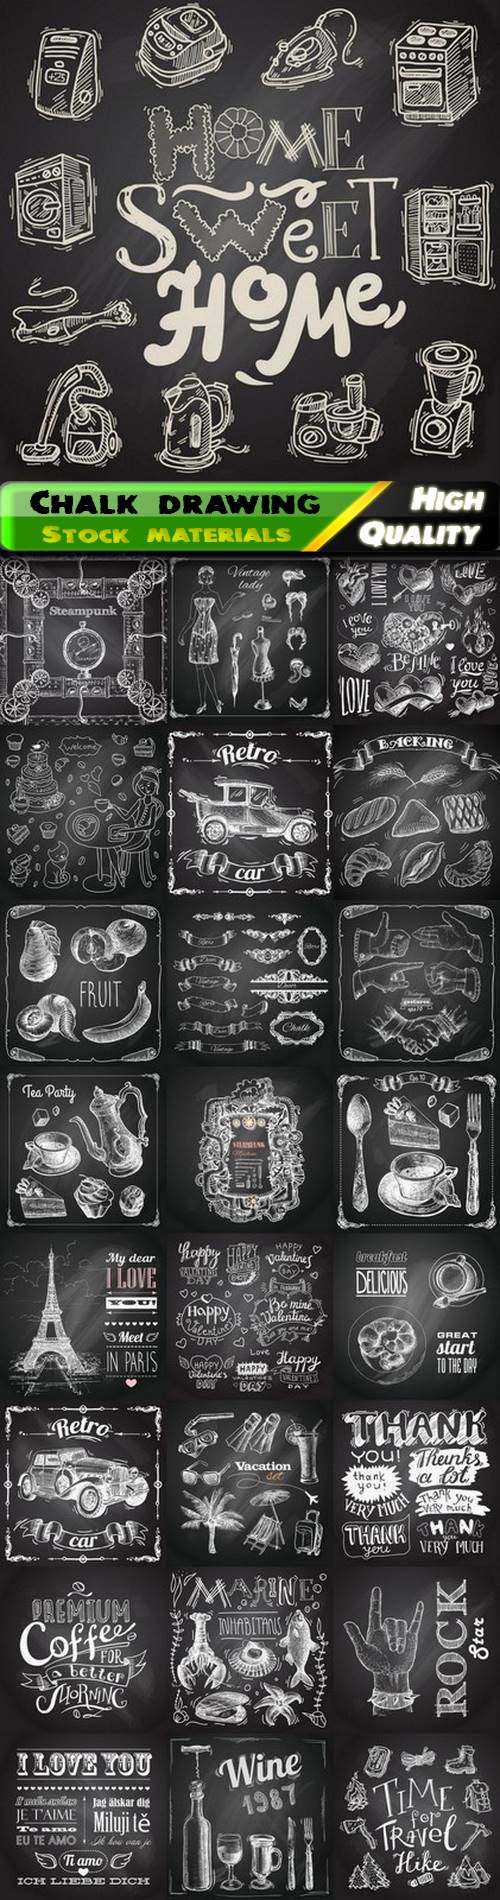 Chalkboard with chalk drawing calligraphy and objects food car 25 Eps